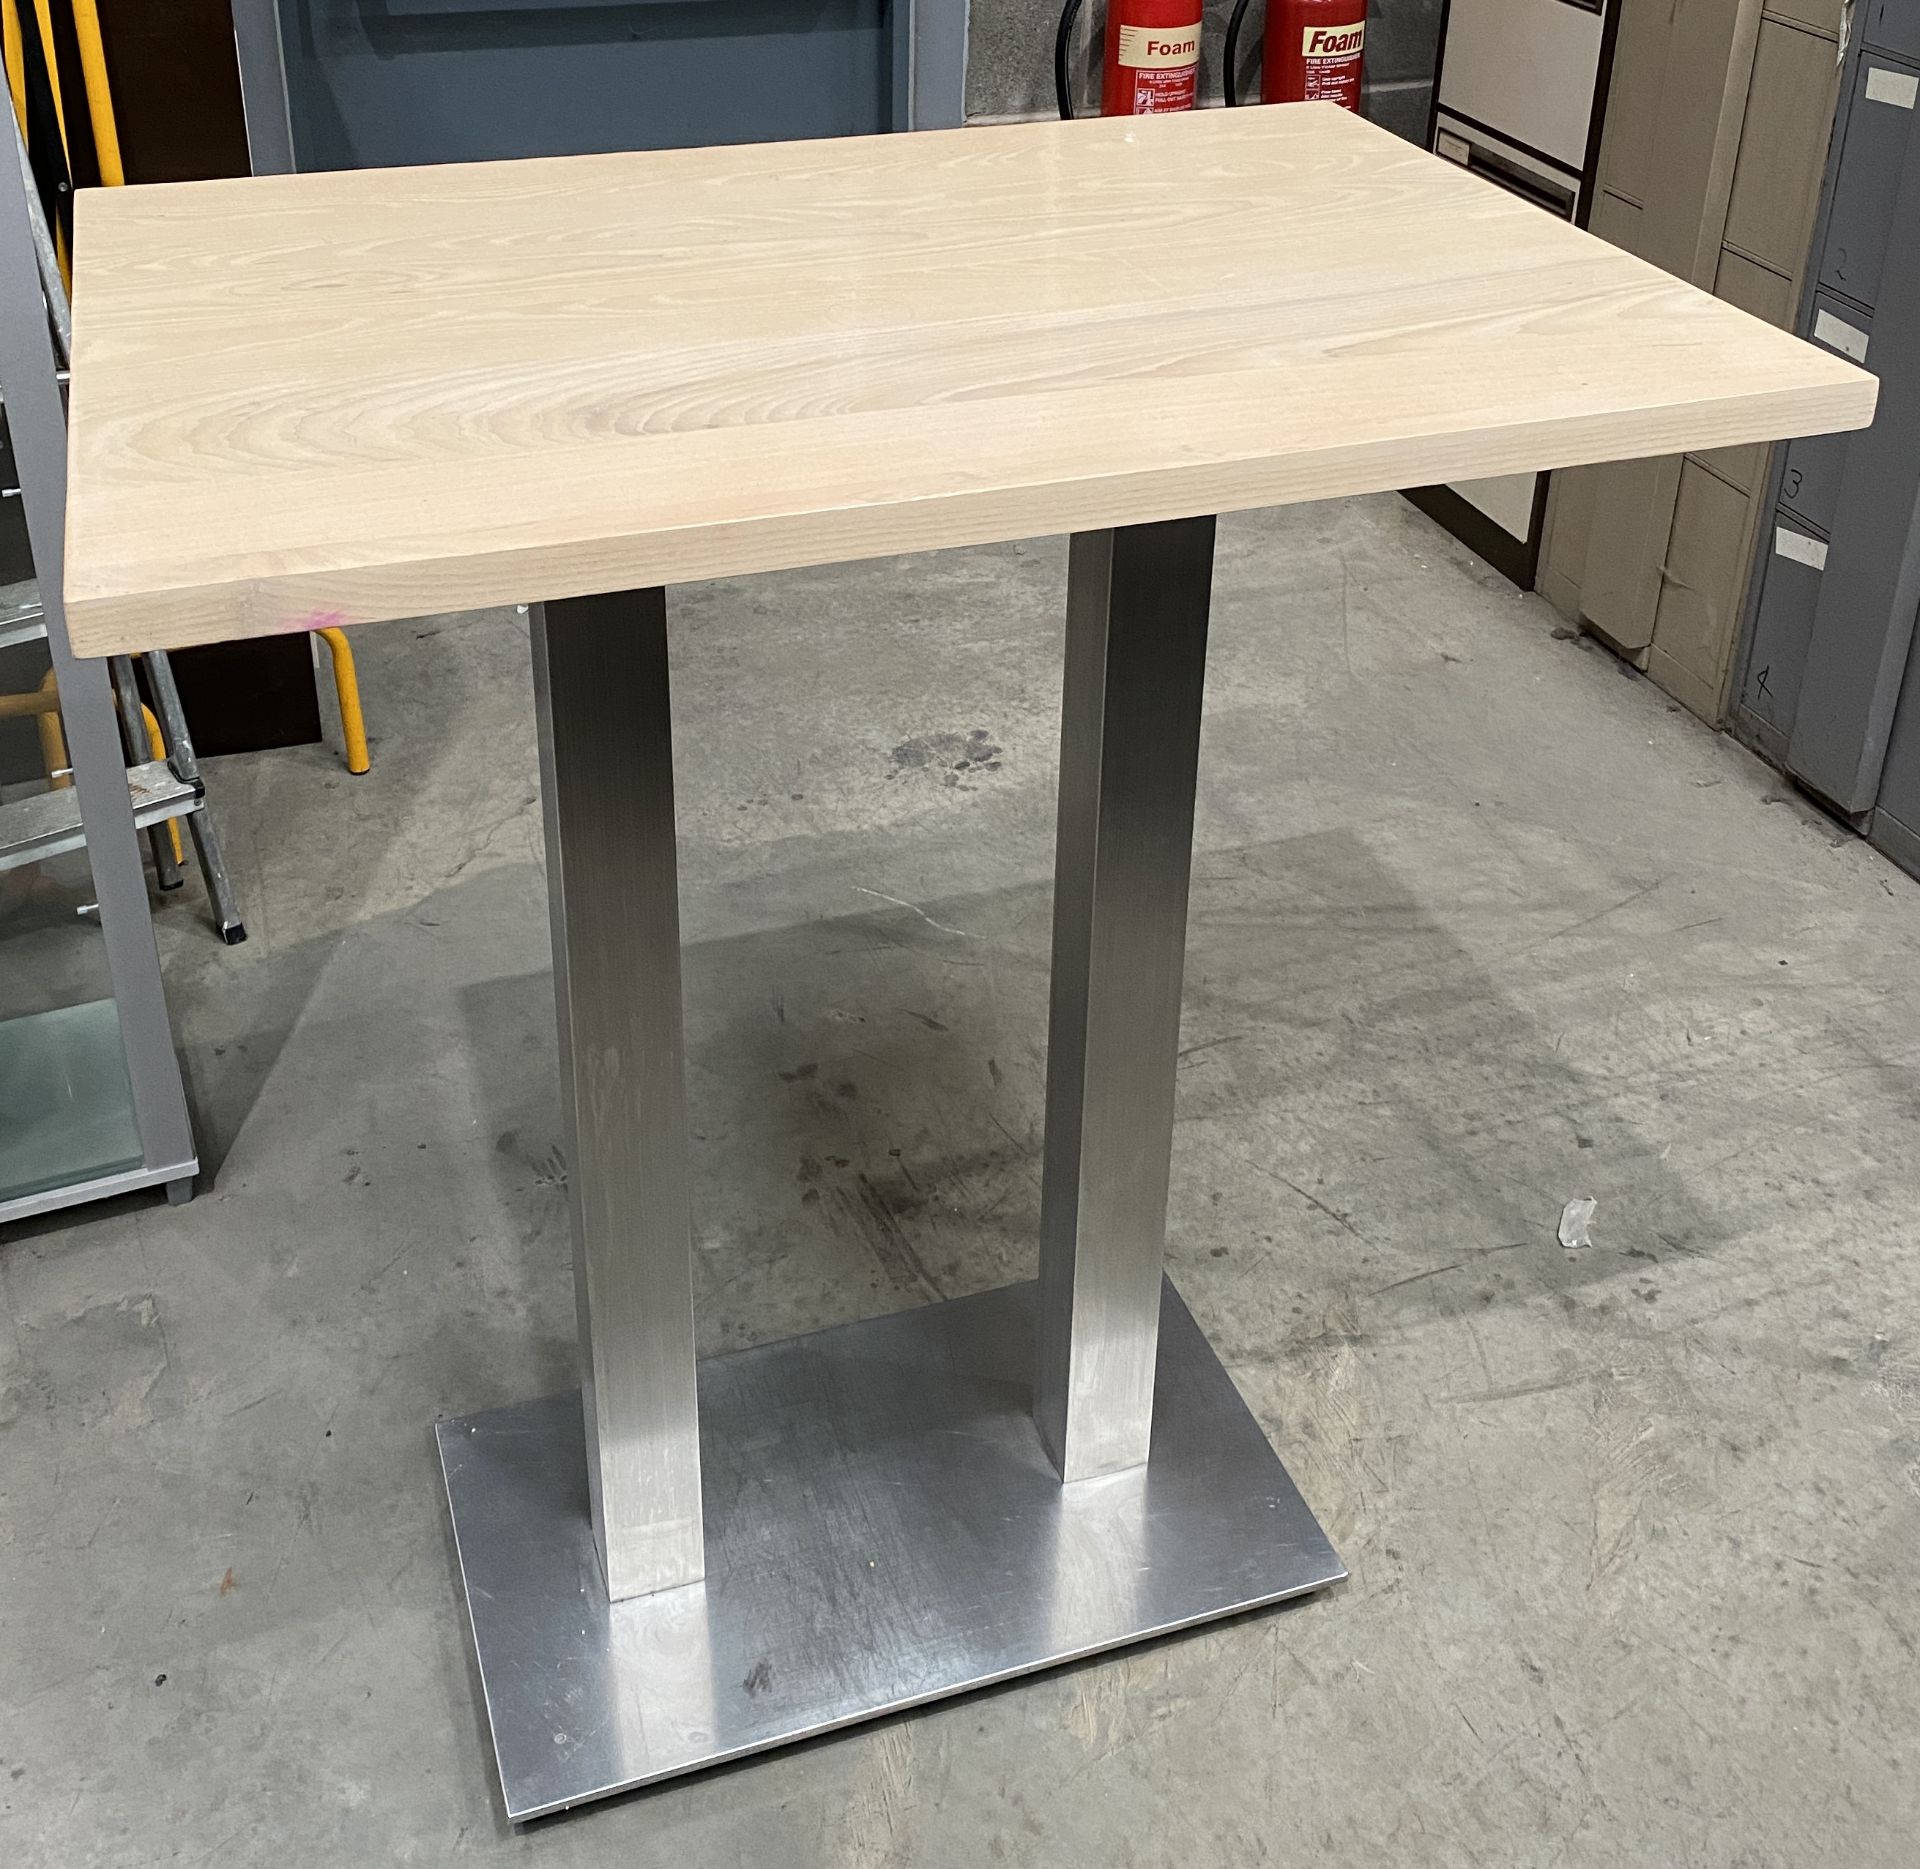 2 x Stainless Steel Twin Based Wooden High Bar Tables - 70cm x 100cm (115cm high)